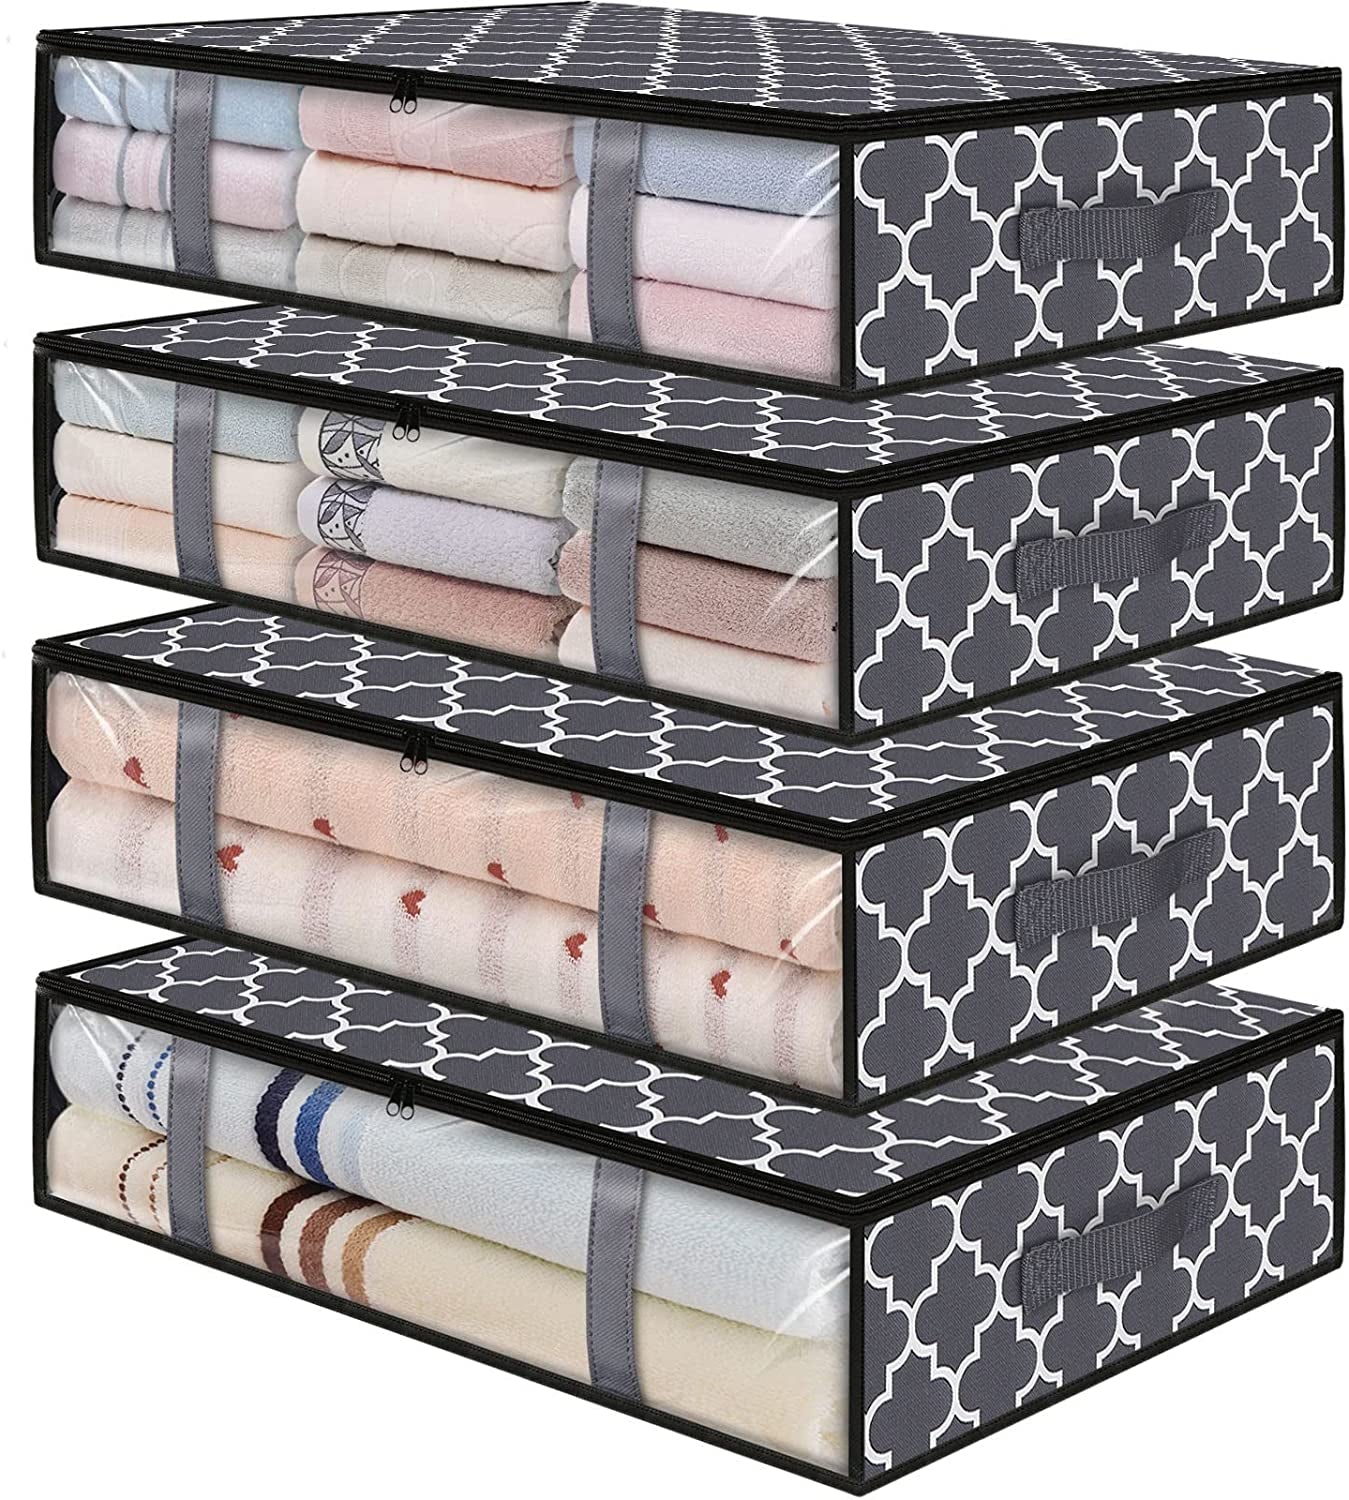 Storage Bins, under Bed Storage Containers, Foldable Clothes Storage Box, Storage Organizer, with Handles, for Comforter, Blanket, Clothing, Sweaters, Pillows, Toys